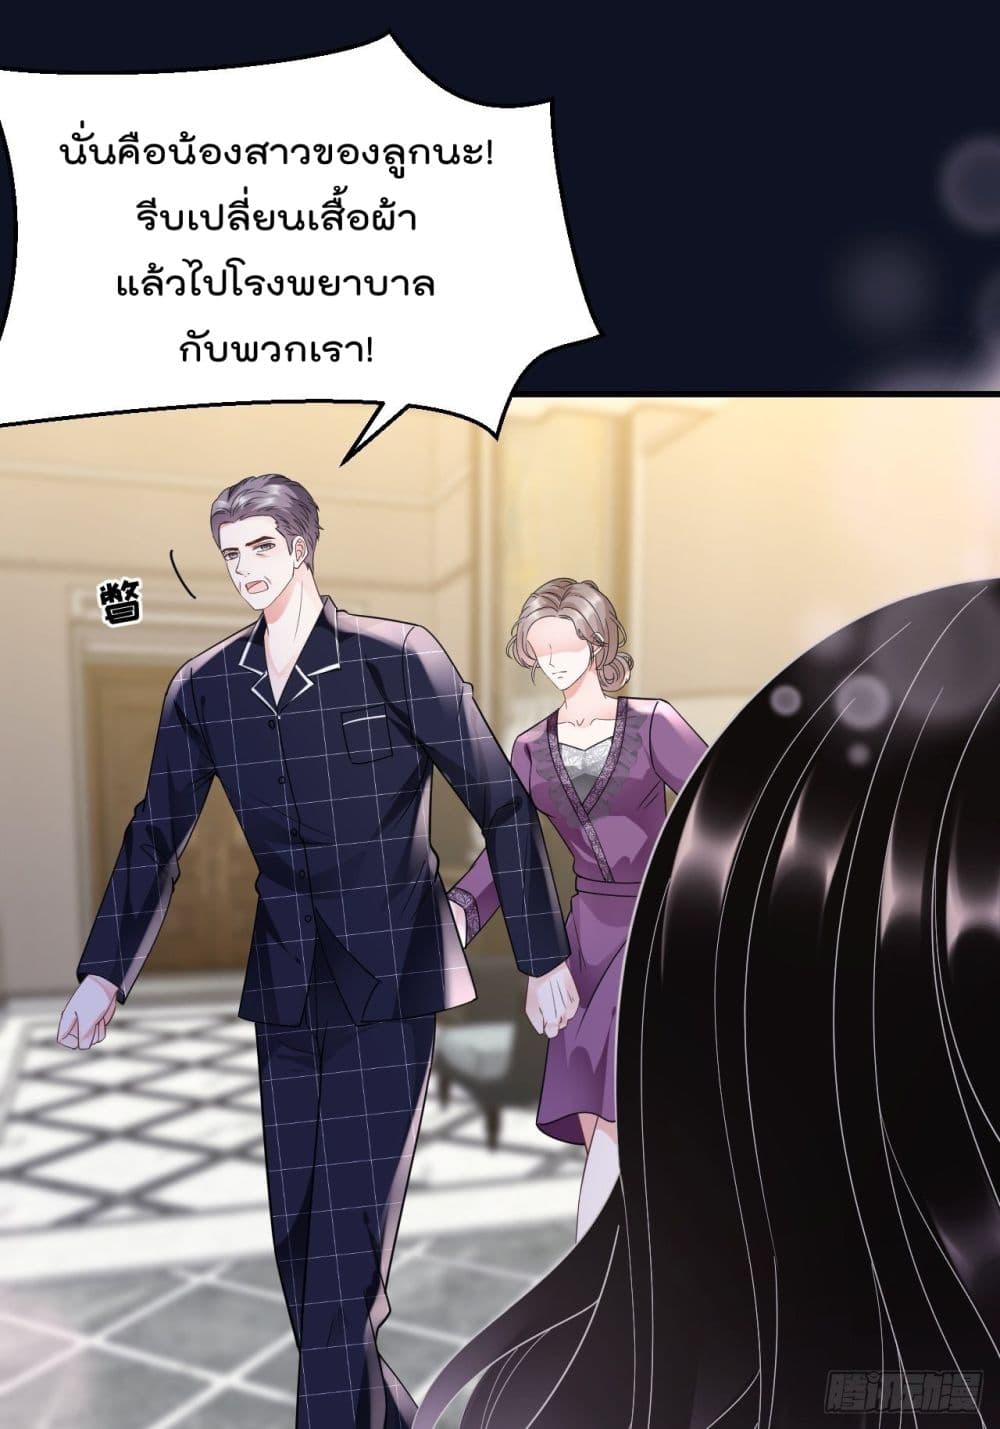 What Can the Eldest Lady Have คุณหนูใหญ่ ทำไมคุณร้ายอย่างนี้ 14-14